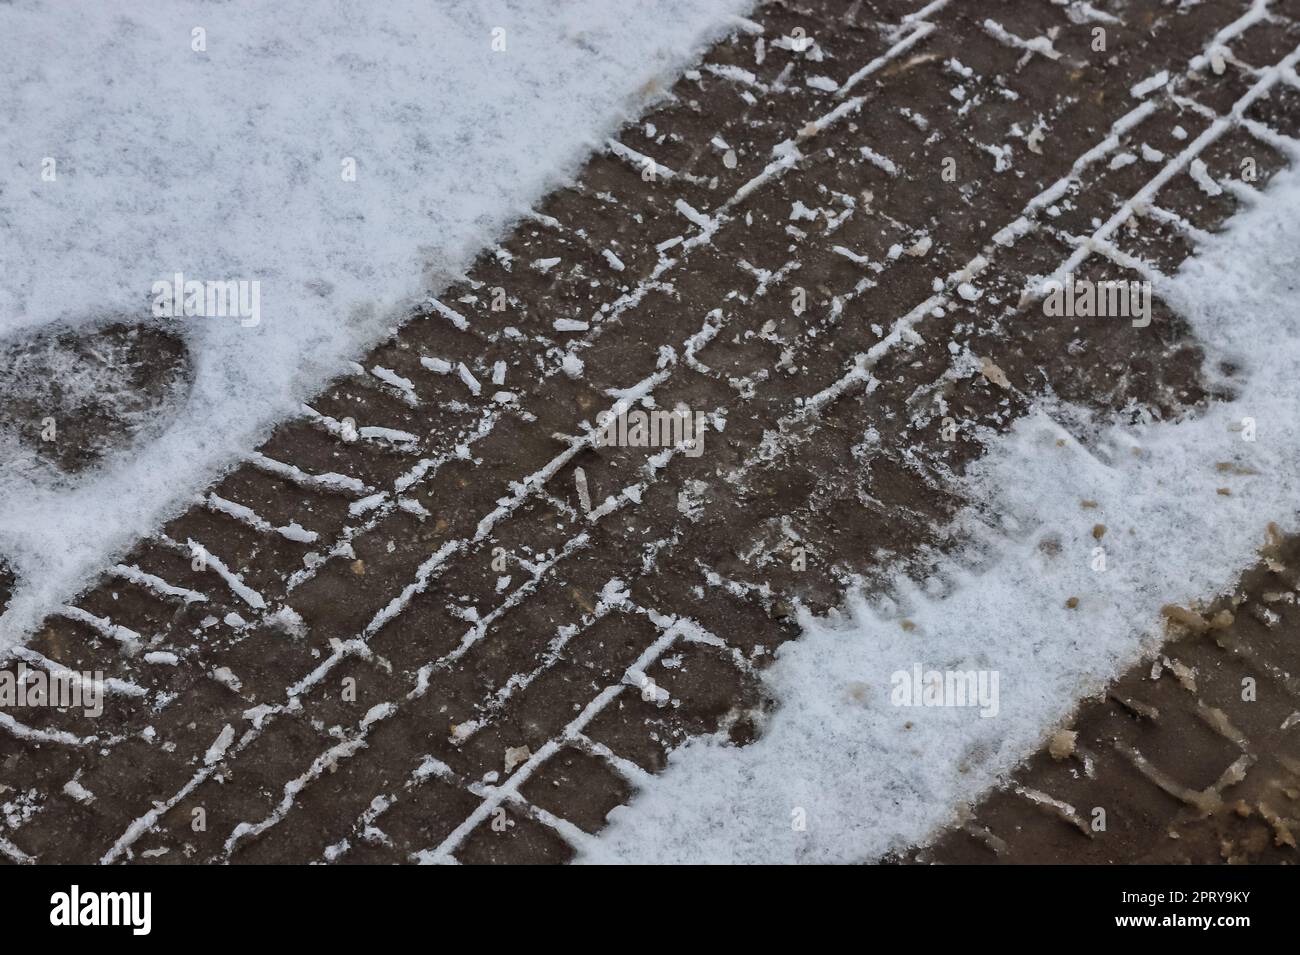 Car tracks on a snowy road. Slippery road, danger, risk of skidding. Traces of winter tire treads. Stock Photo